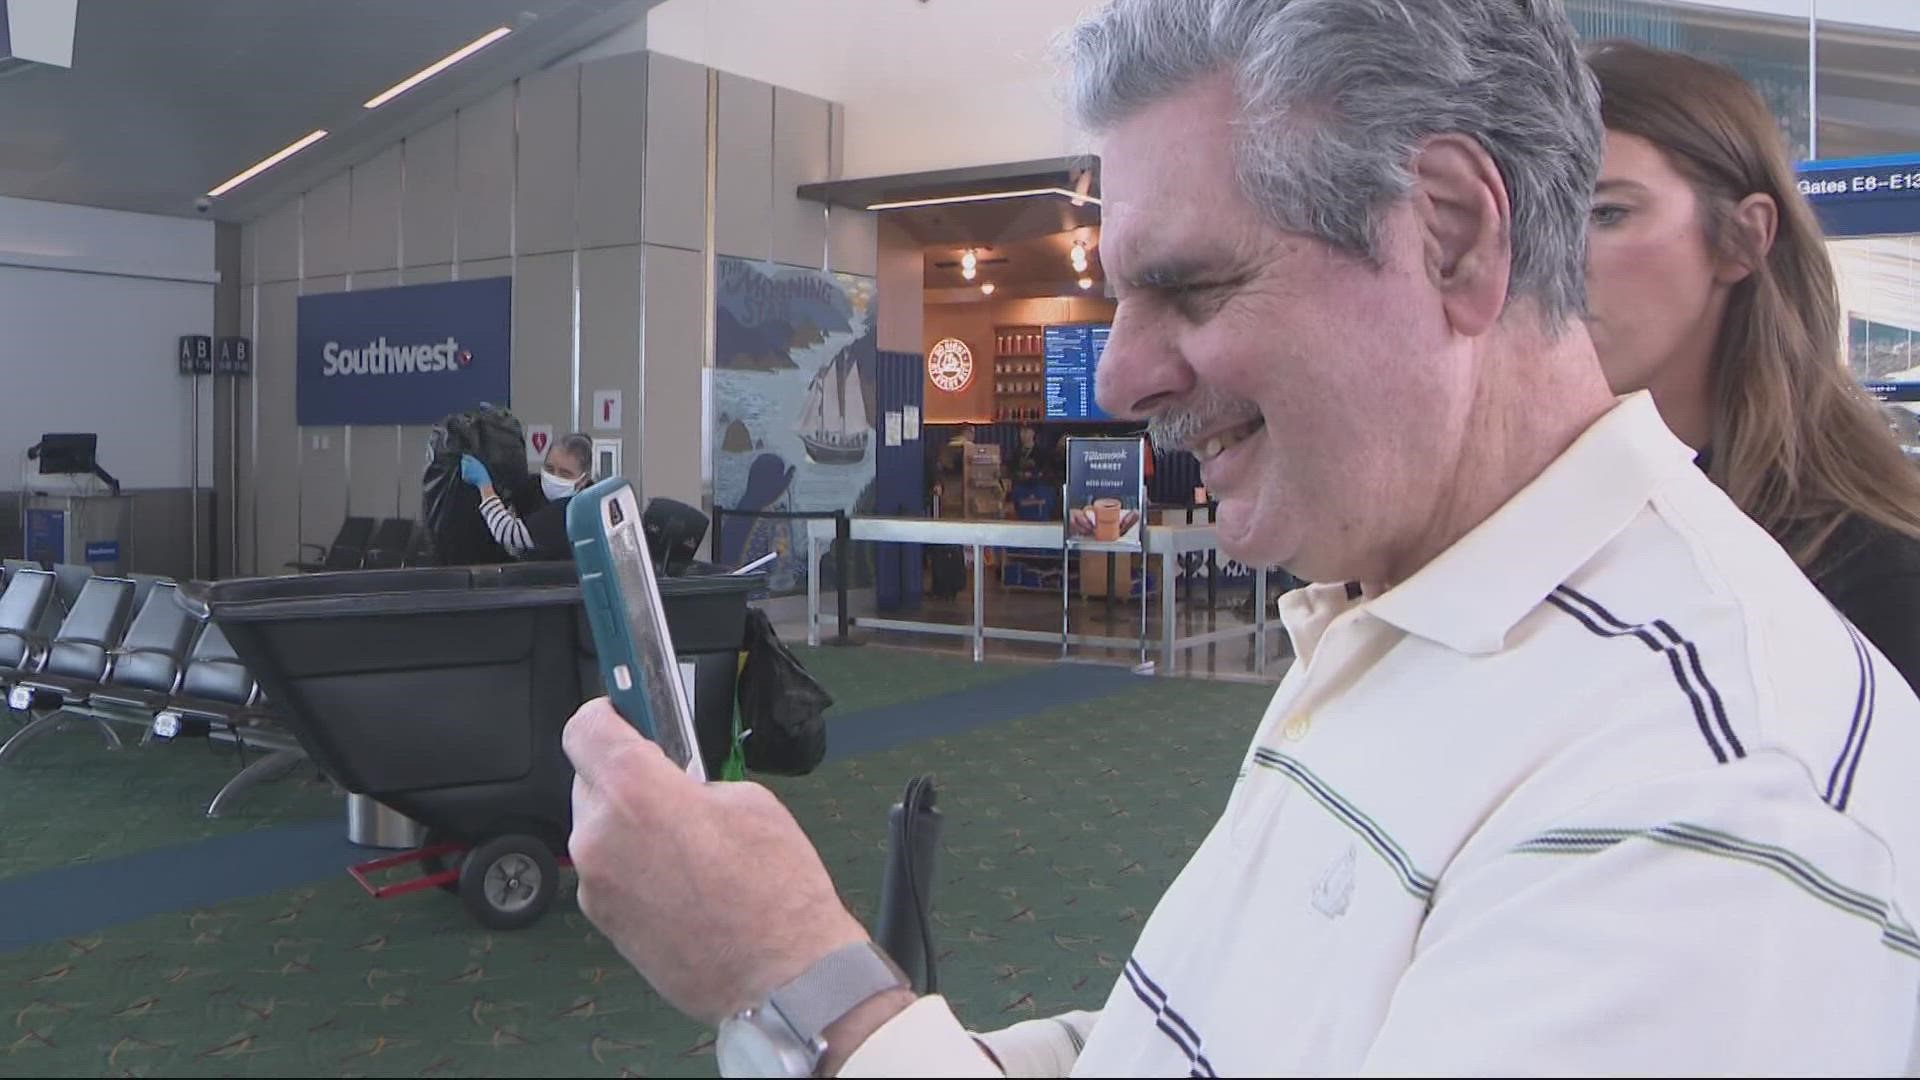 Getting around an airport can be especially challenging for those who are blind. Now a new indoor navigation app is available to assist with directions at PDX.